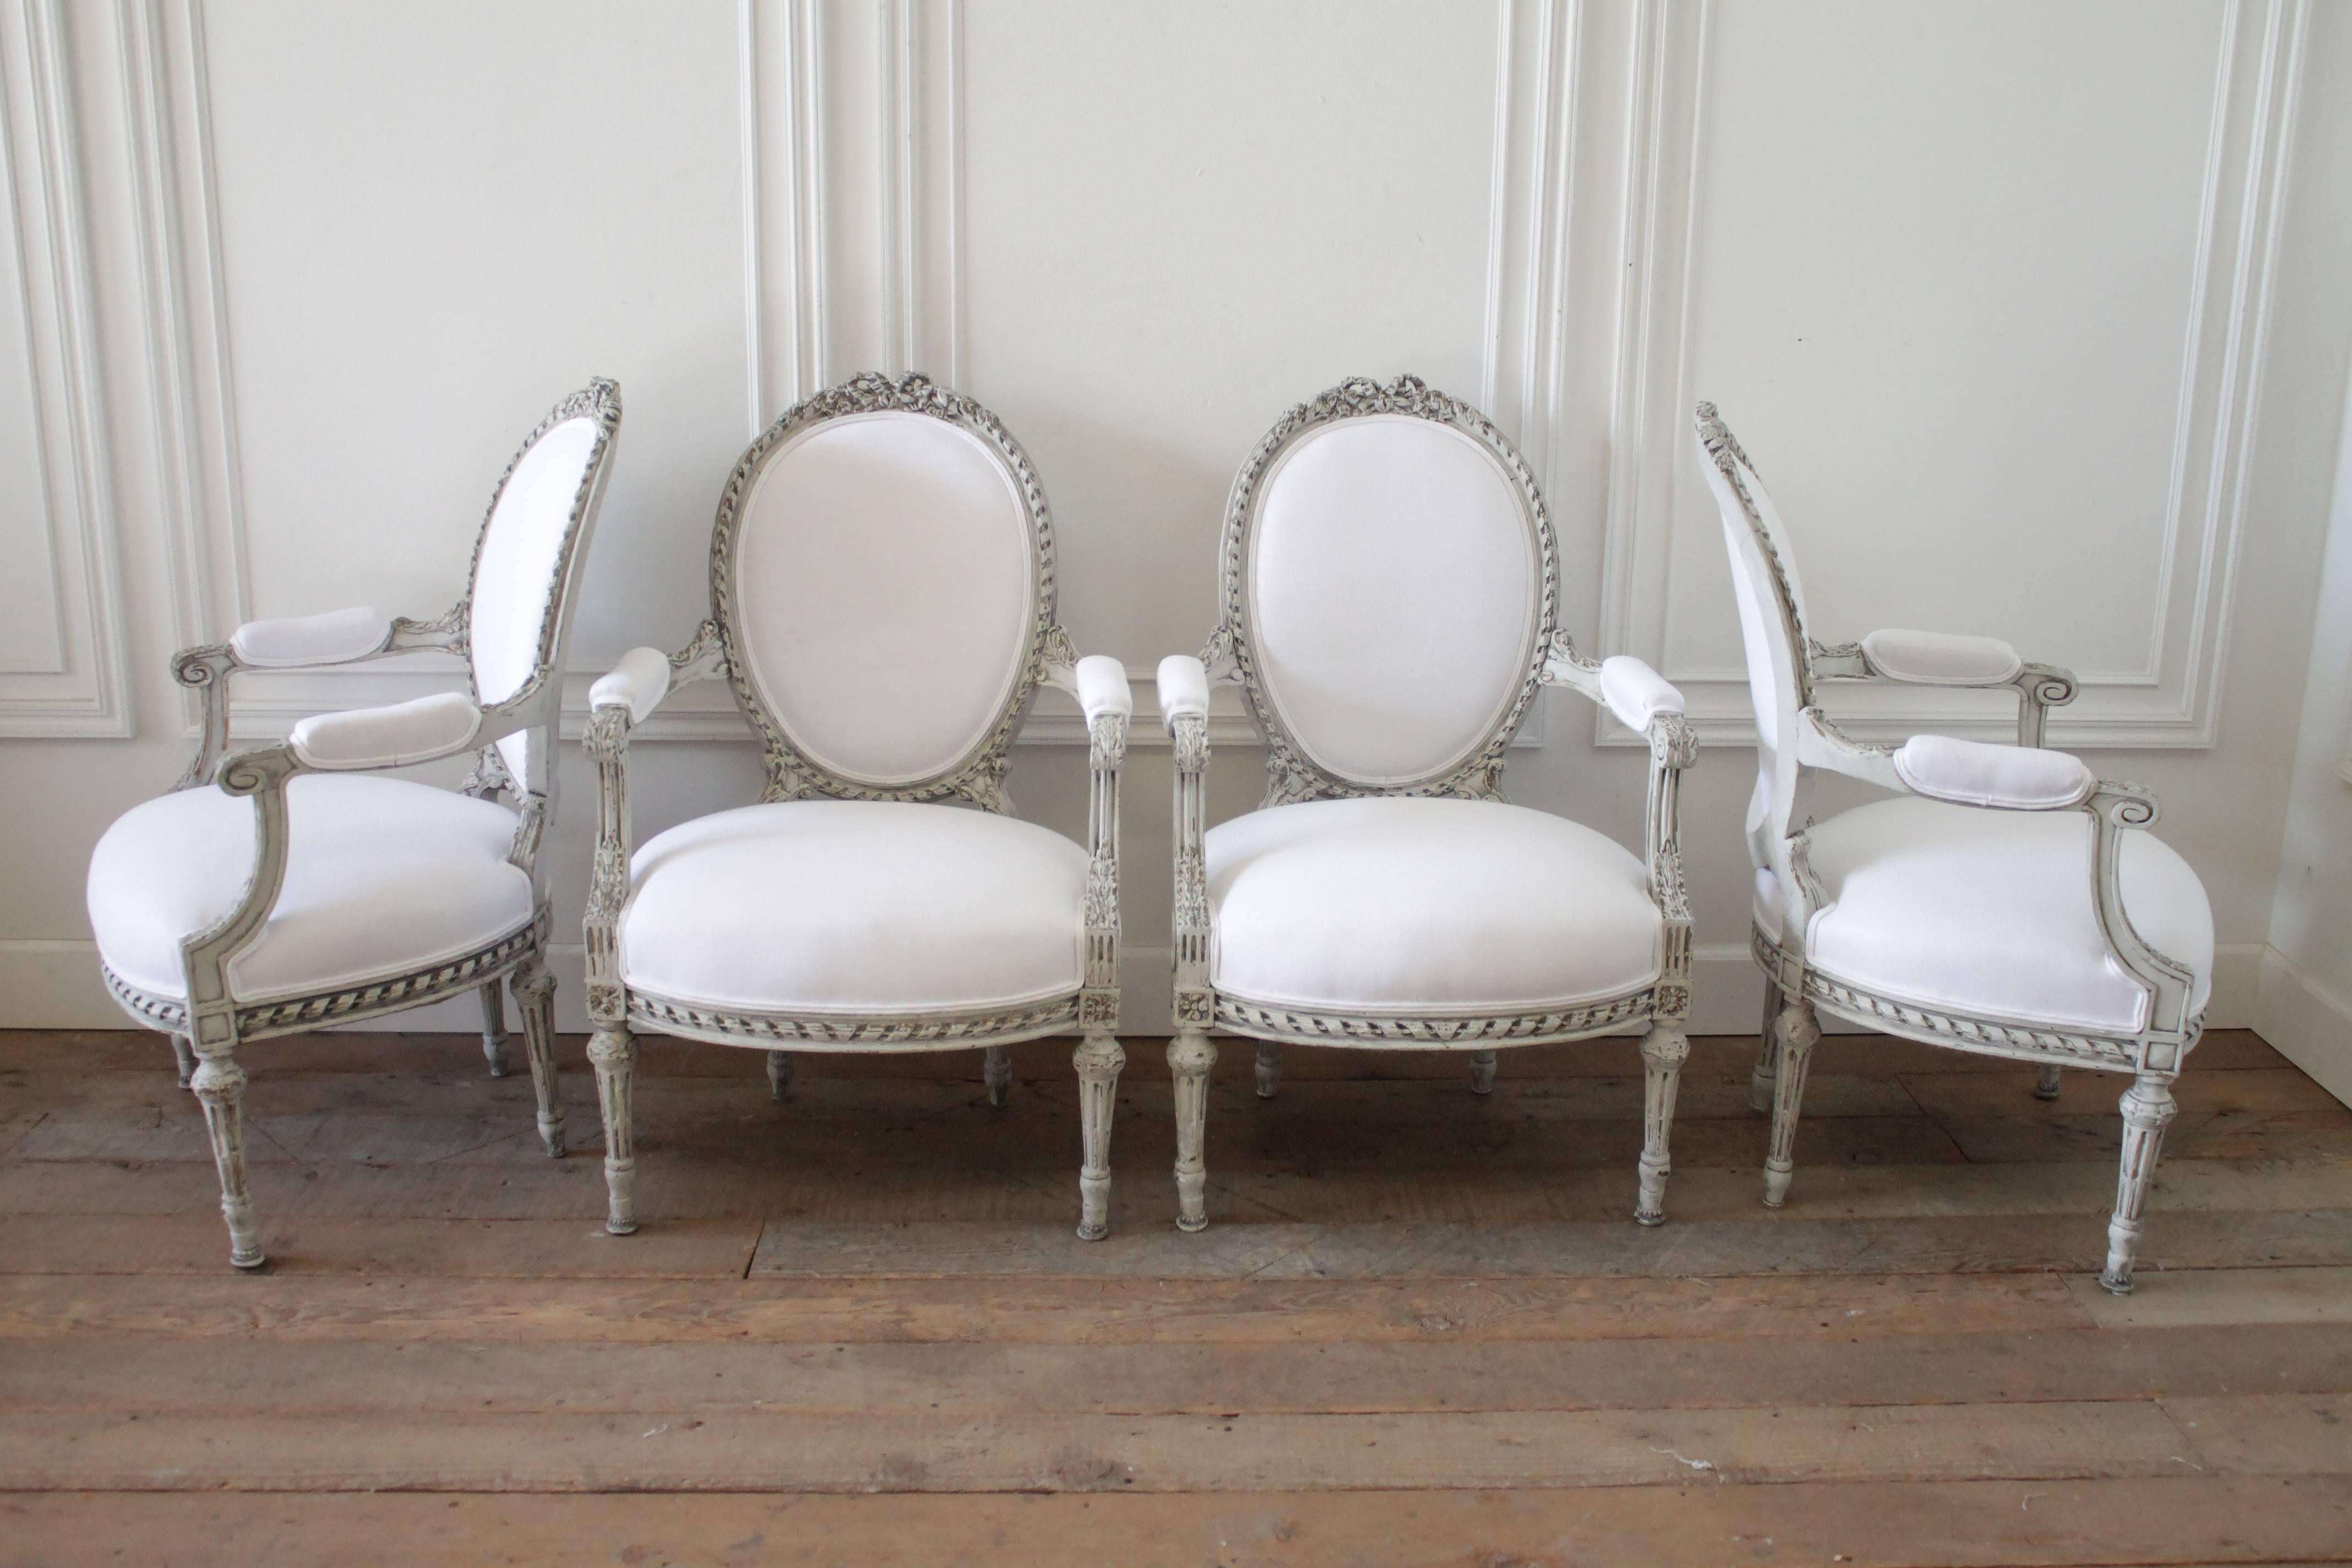 Lovely Louis XVI carved ribbons chairs we have reupholstered in a soft washed white organic Belgian linen. The frames are painted in our custom French grey antique finish. Subtle tones of original gilt and white are peeking through the distressed